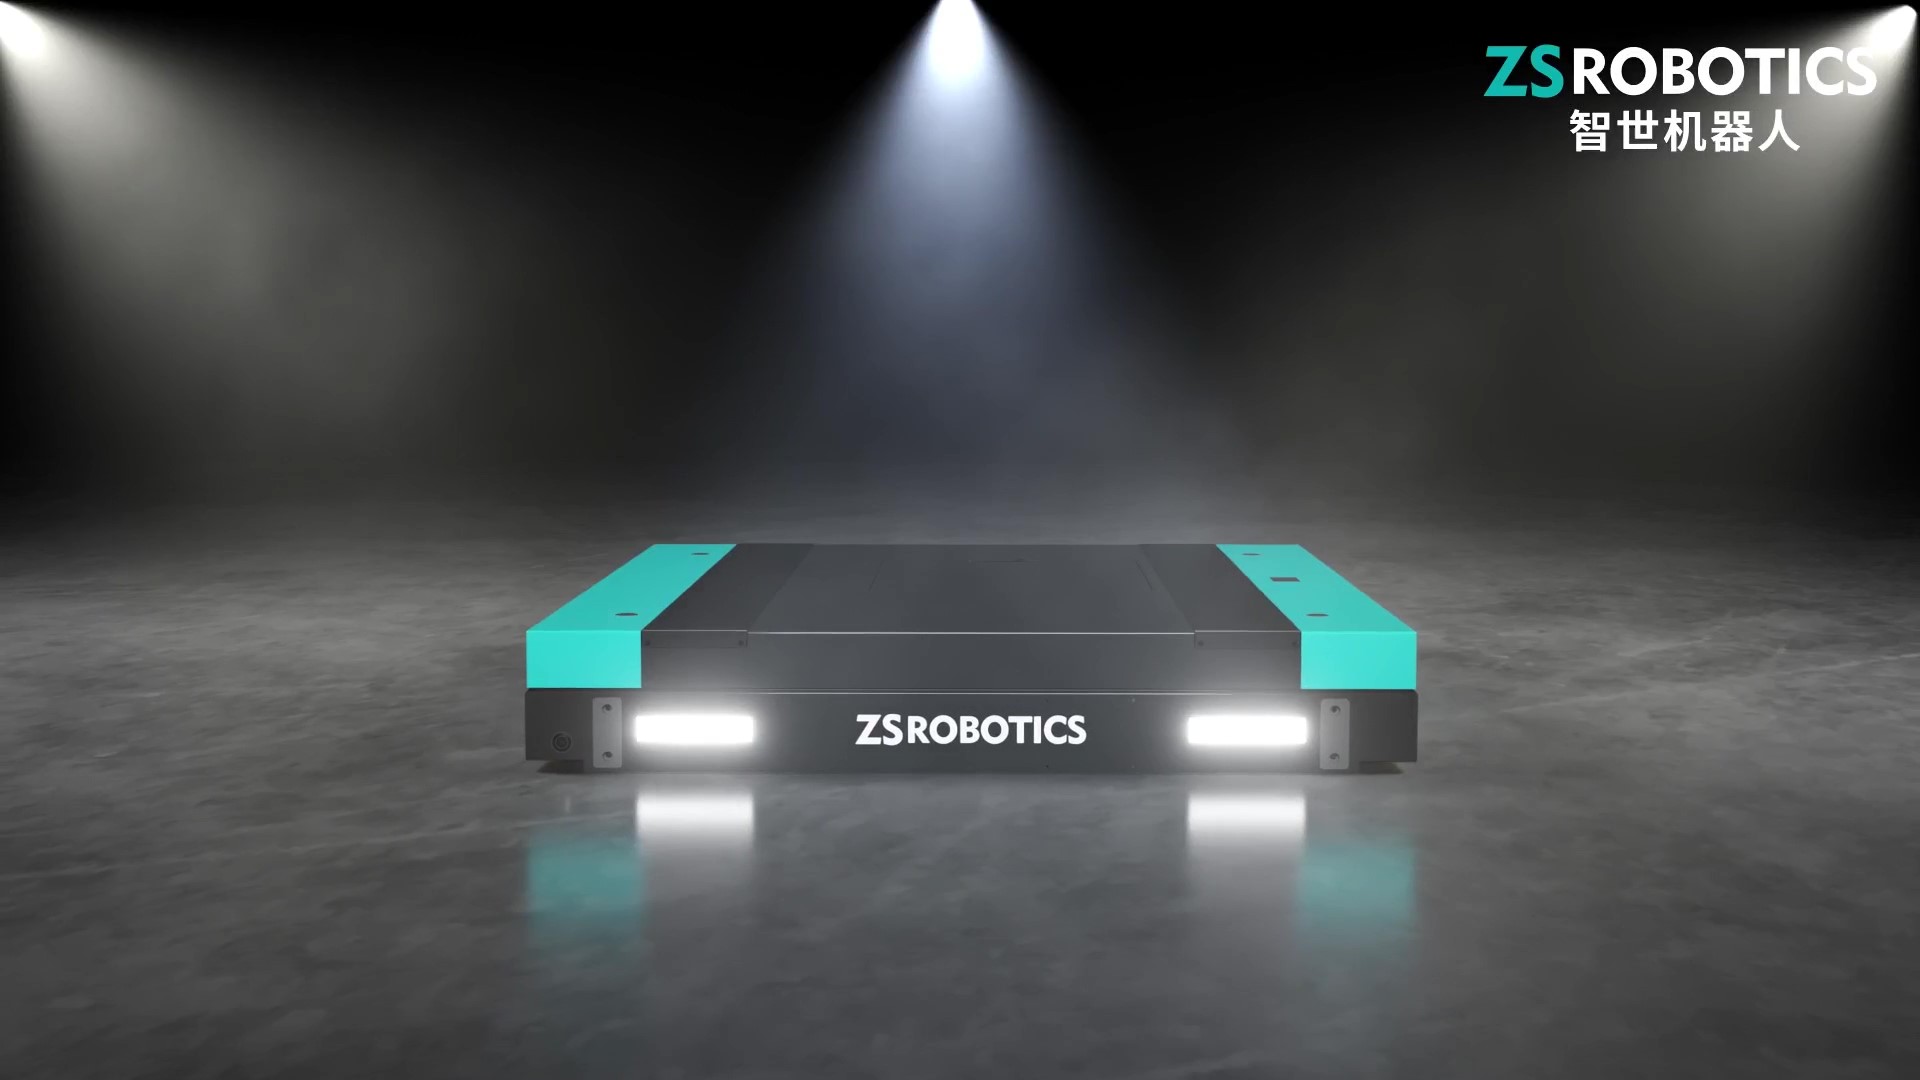 Tinner, Smaller, Smarter! Get to Know Six Advantages of Four-way Shuttle Robot Developed by ZS Robotics